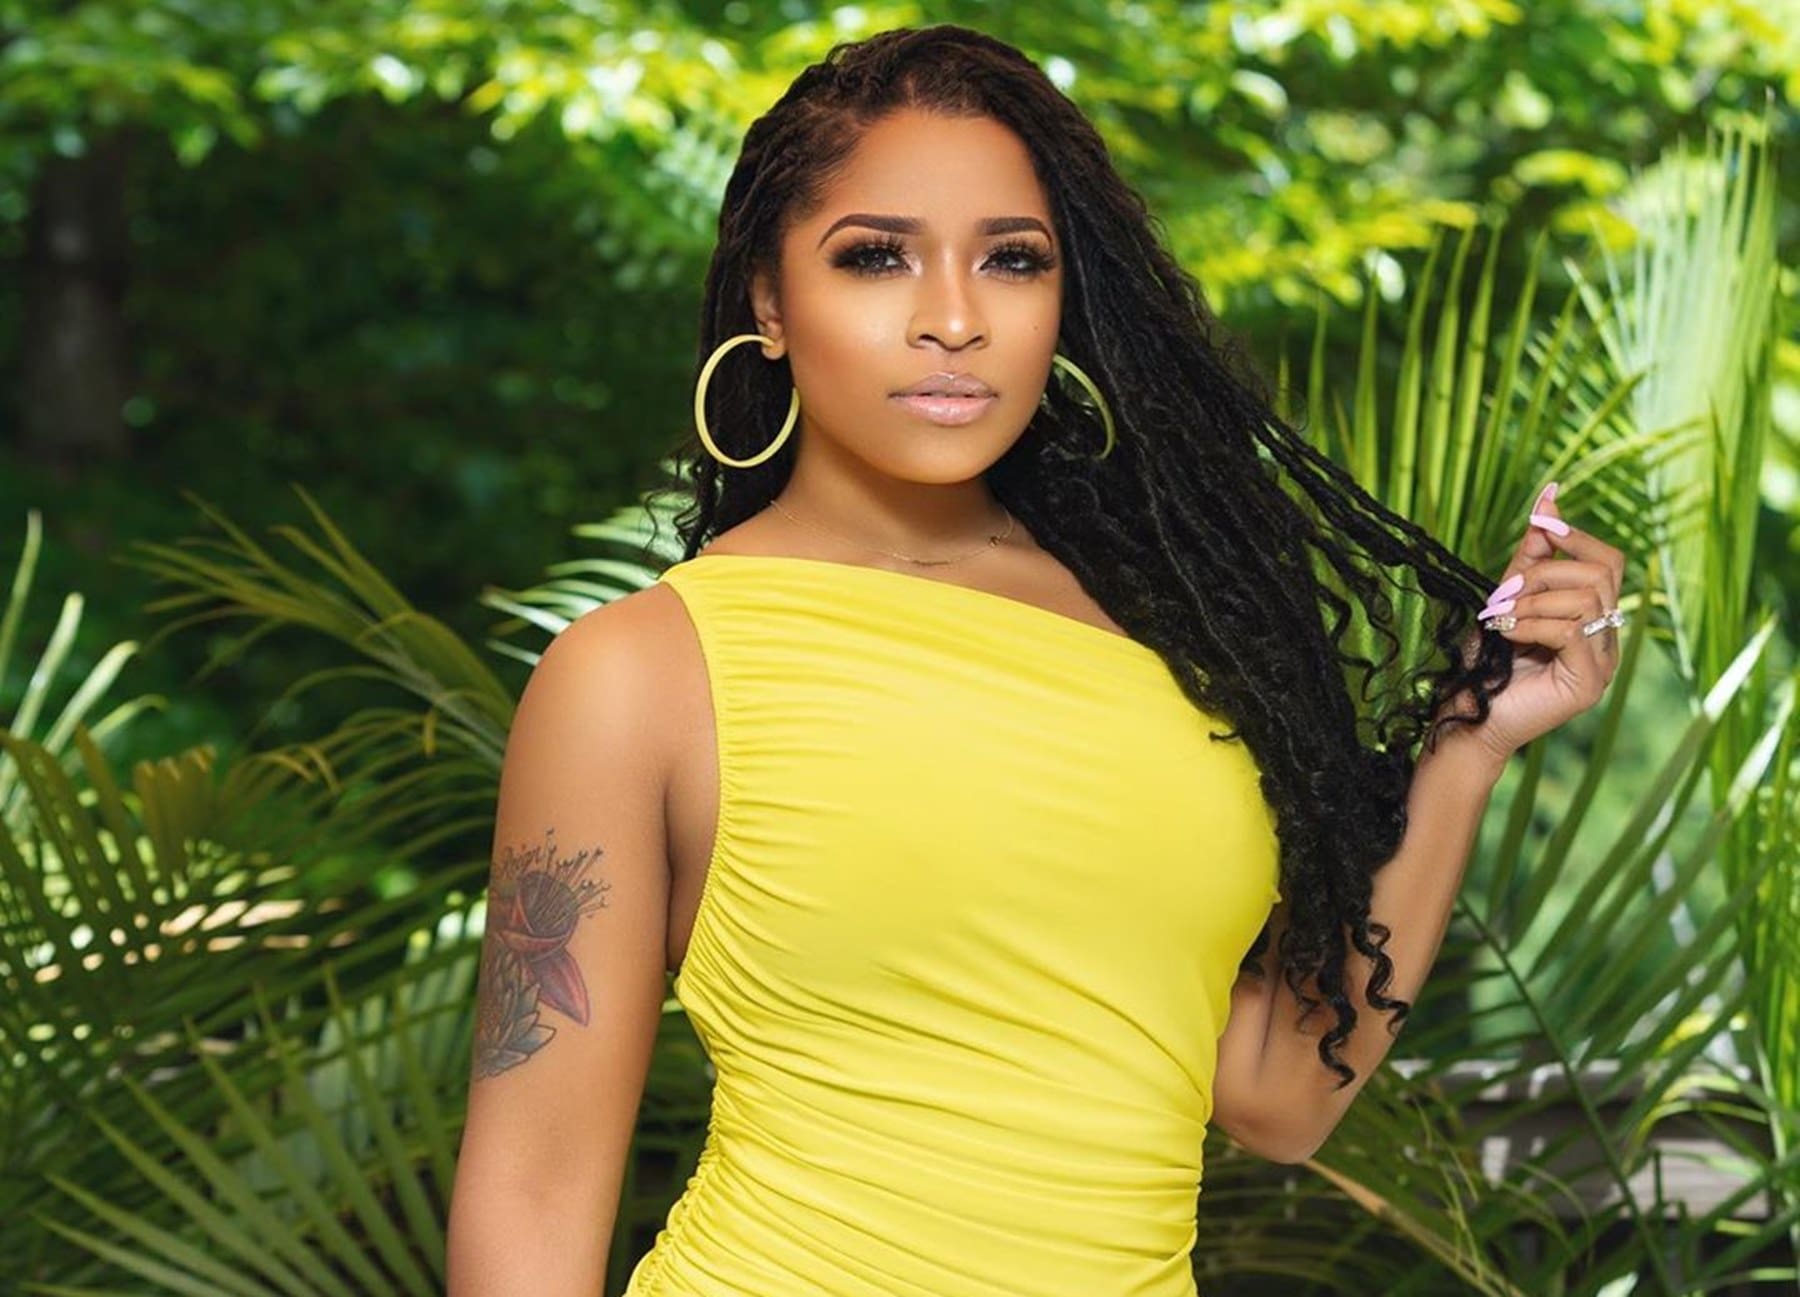 Lil Wayne Is Dragged After His Ex-Wife, Toya Johnson, Shared This Eye-Popping Photo — Their Daughter, Reginae Carter, Reacts In Interesting Way